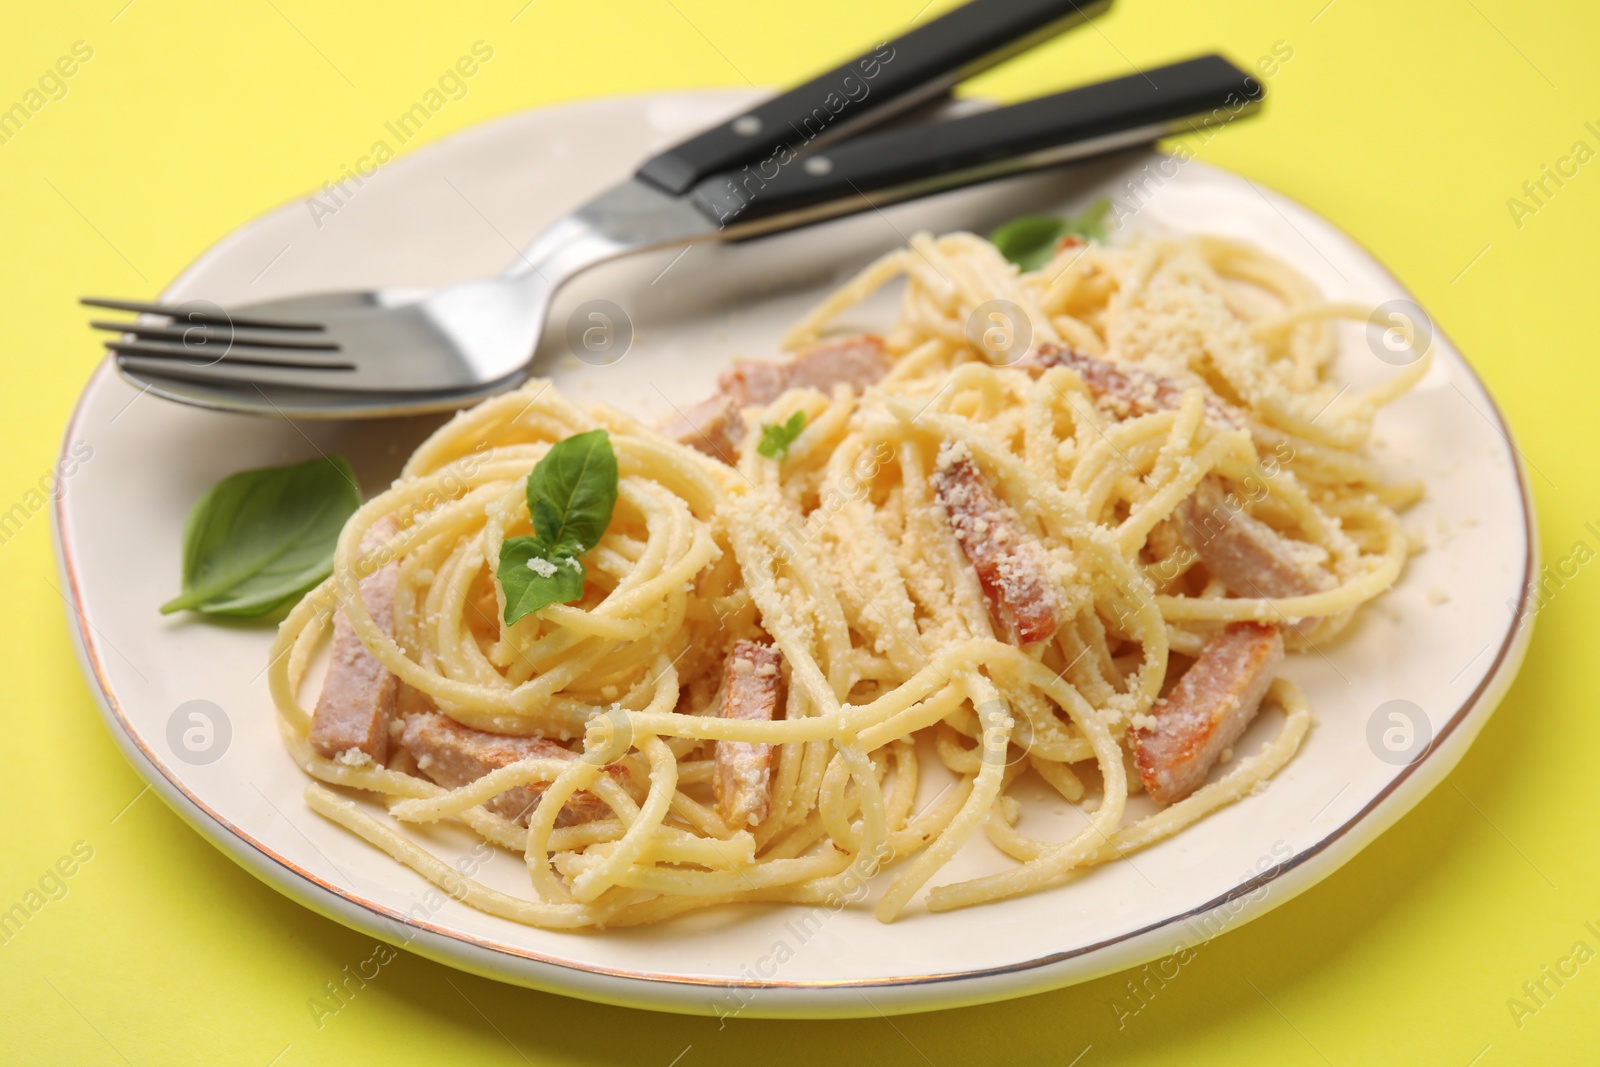 Photo of Plate of tasty pasta Carbonara with basil leaves, fork and spoon on yellow background, closeup